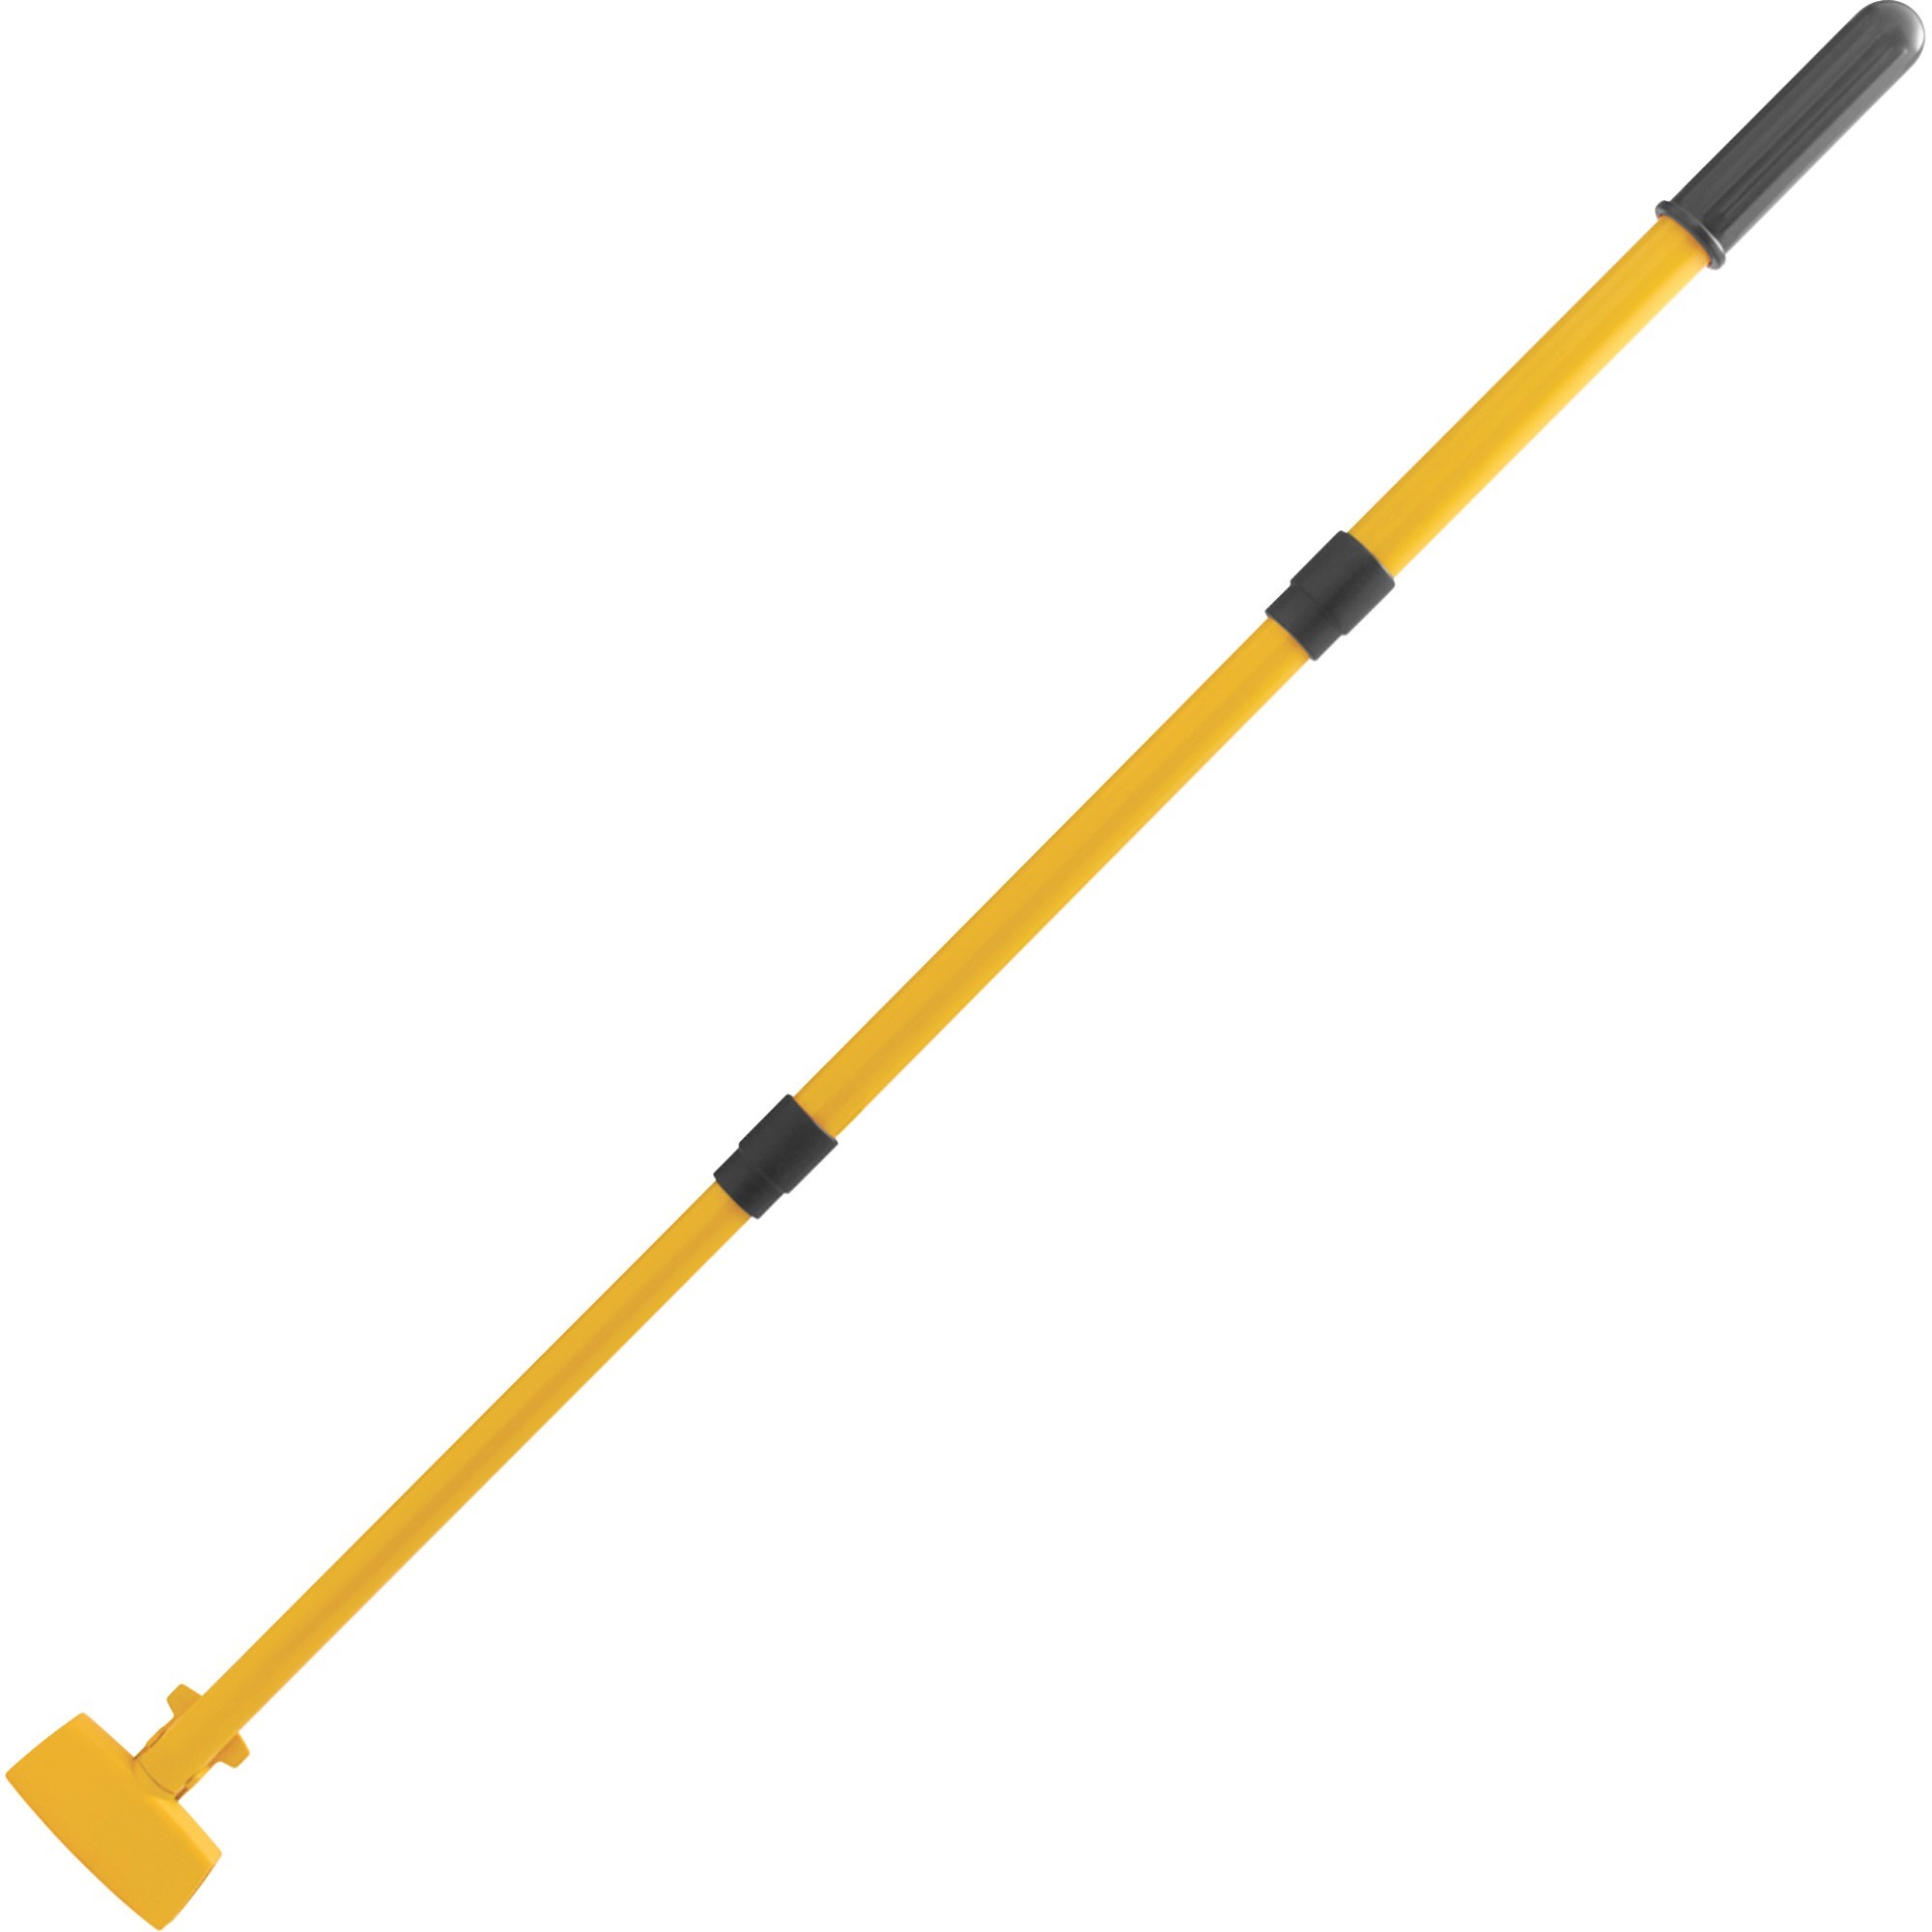 Collapsible Spill Mop Handle, 22" to 47.5", Yellow, 12/case